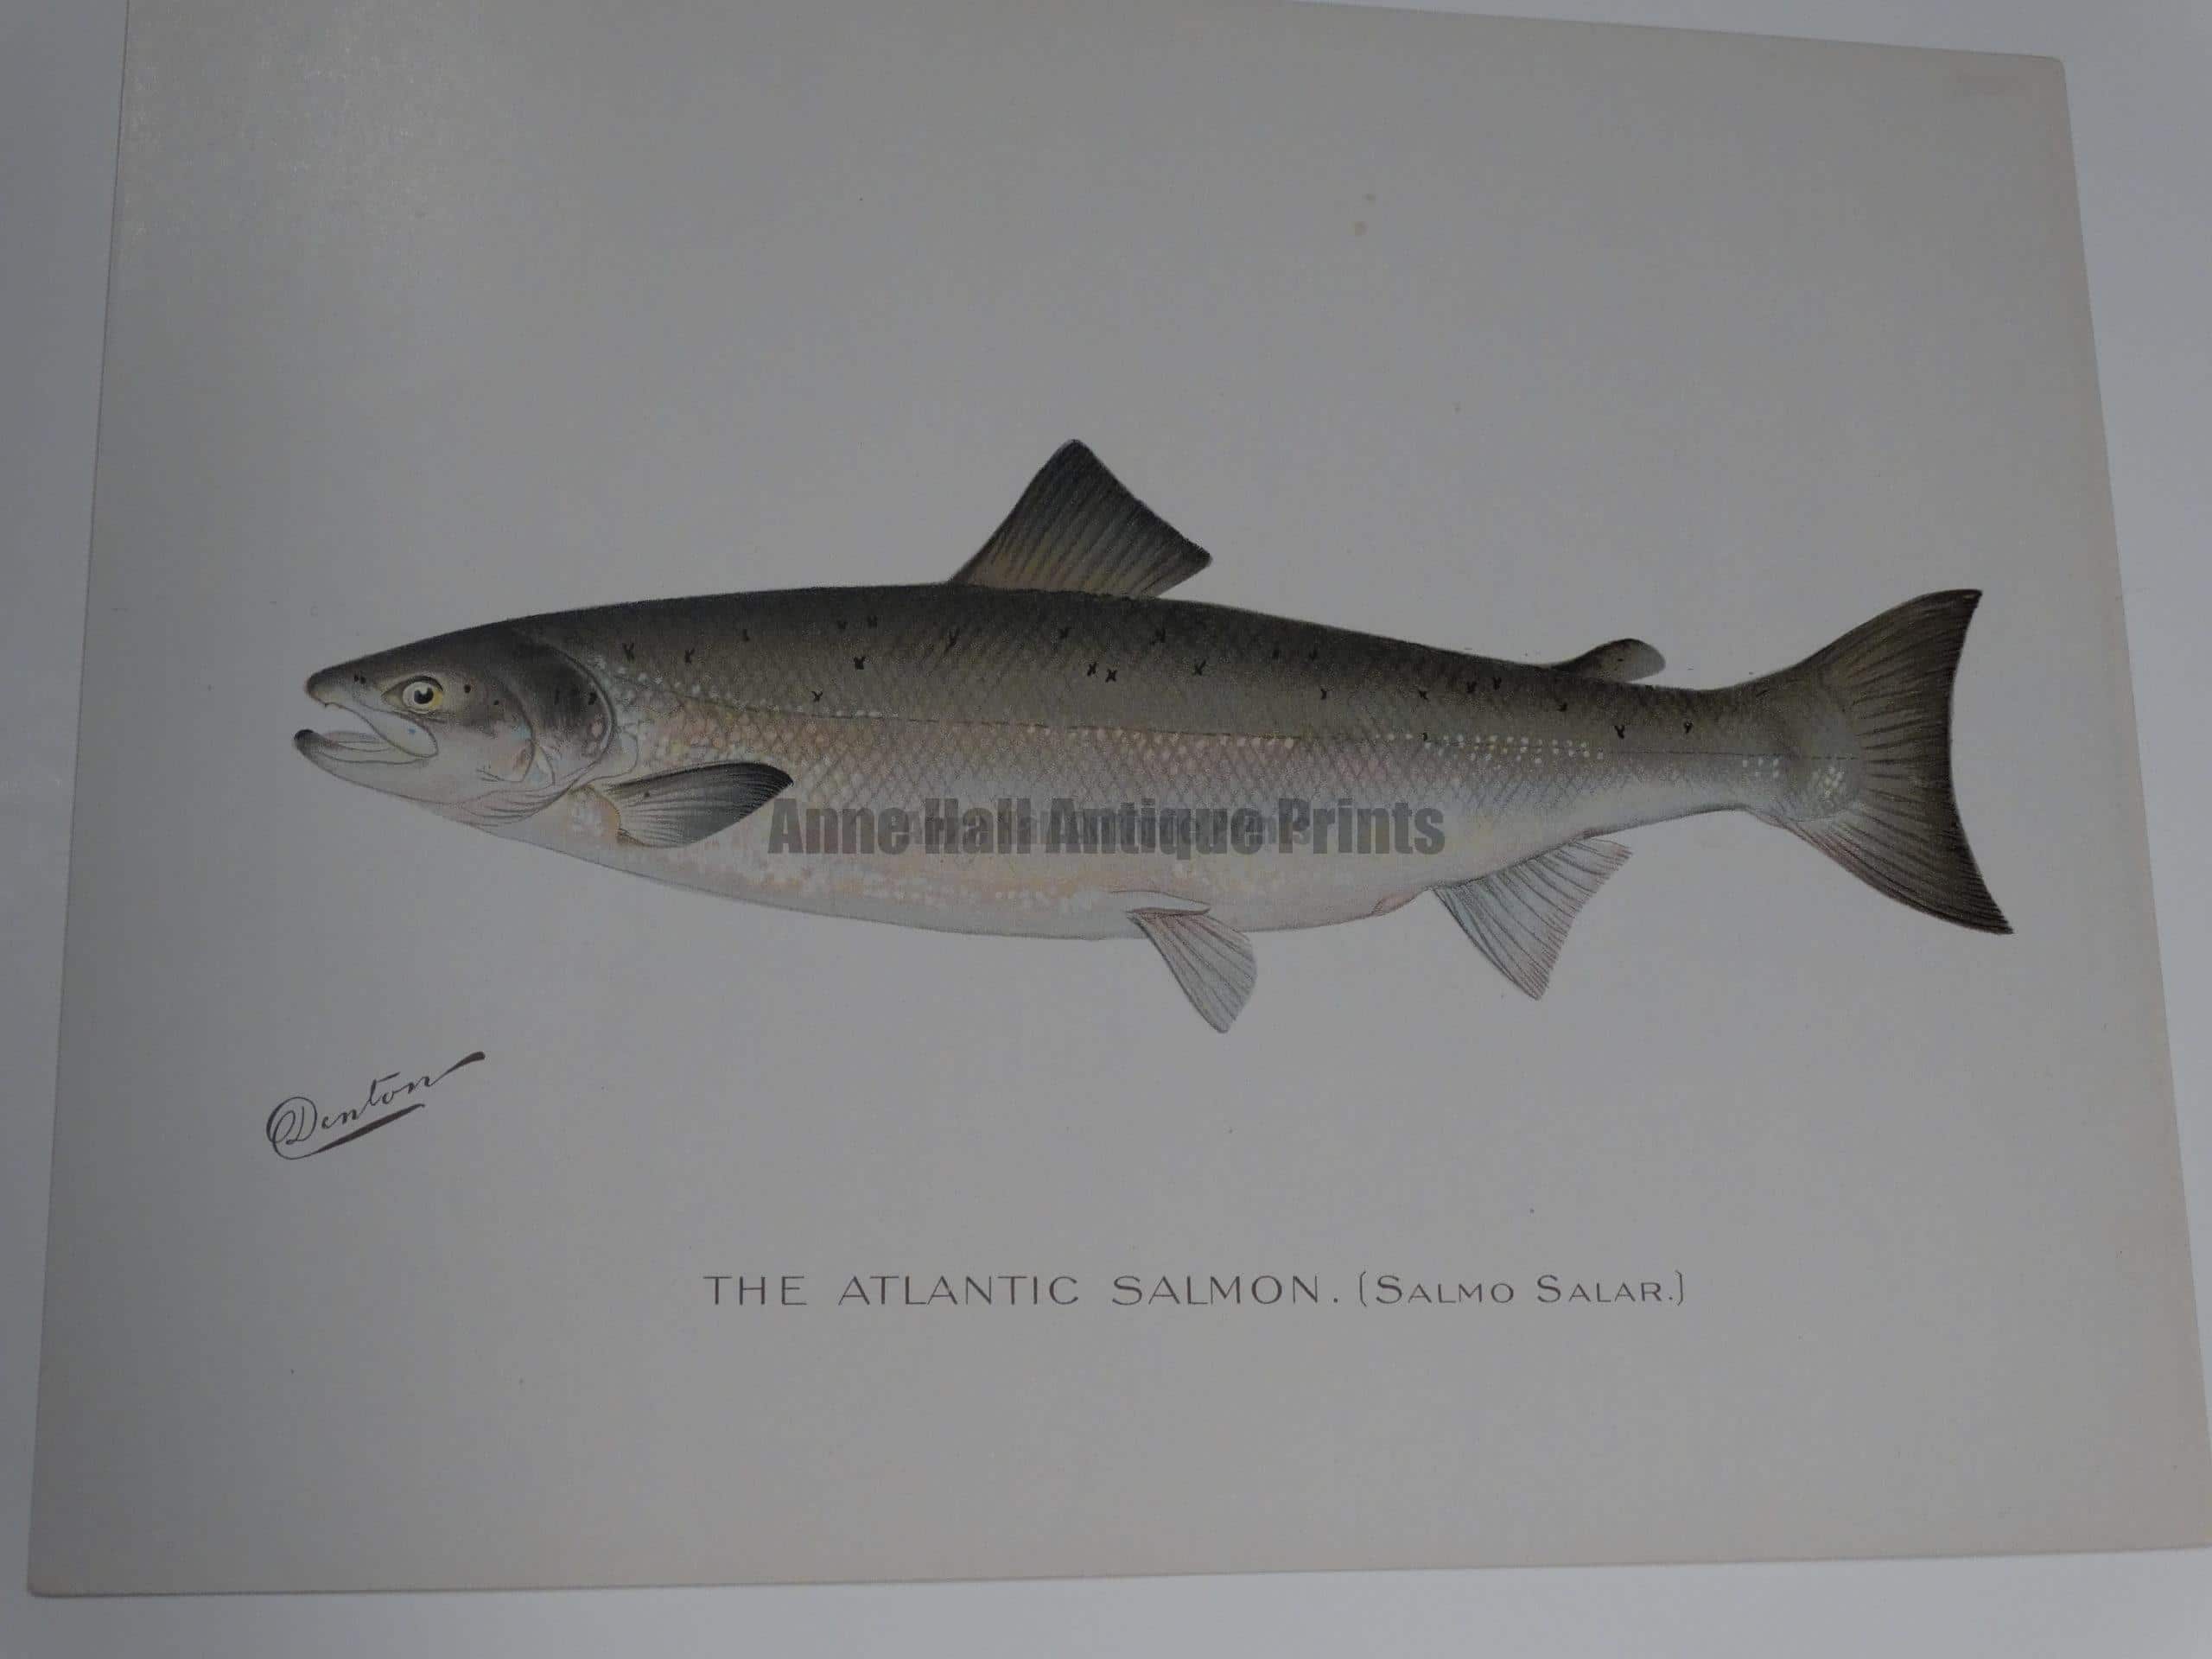 Denton Atlantic Salmon Salmo Salar. An outstanding portfolio color-lithograph published for Sherman Denton, as documentation of trout-salmon found in North America. 9 1/2 x 12"